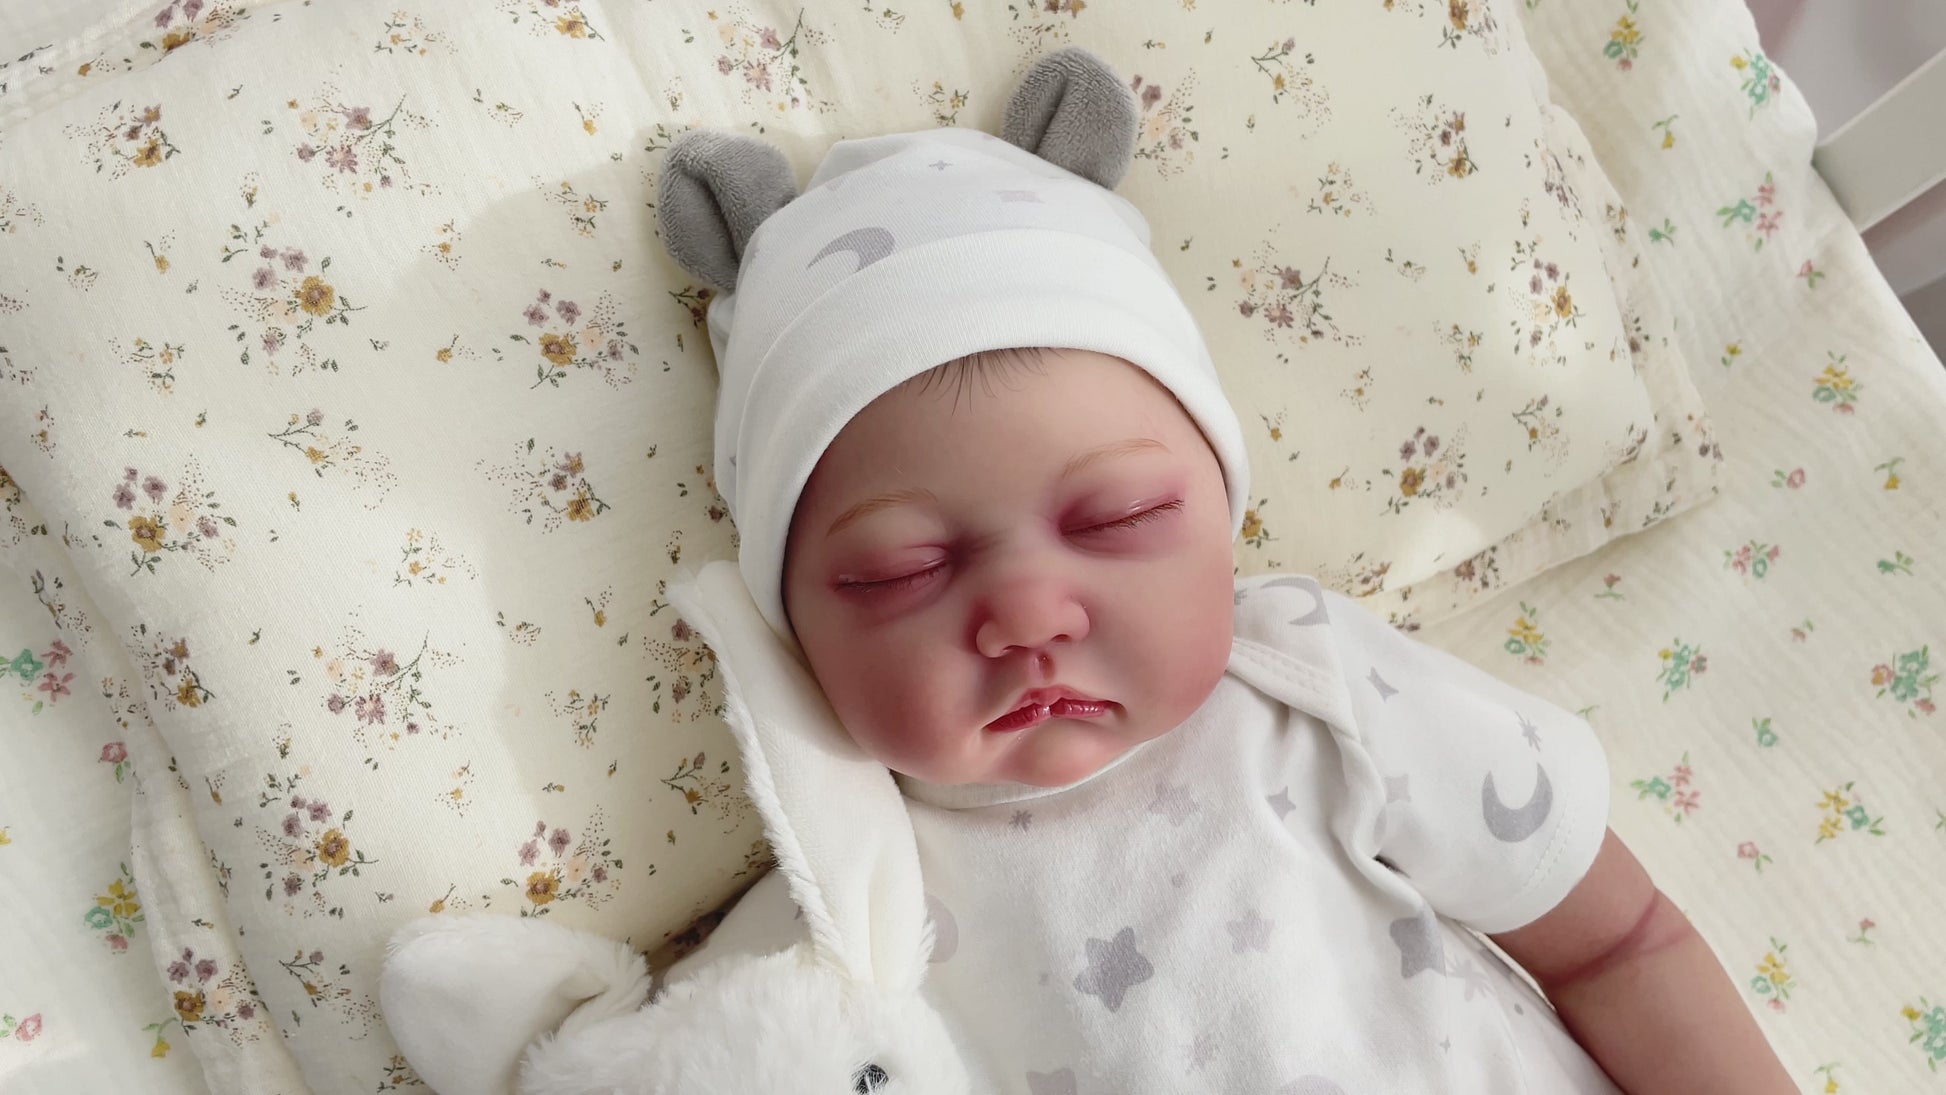 For a perfect reborn baby doll as a perfect gift, choose kaydora realistic dolls. They are lifelike and can be a perfect partner for your family members. Such as they can accompany your baby to play and accompany the elder to ease their mood and feeling.